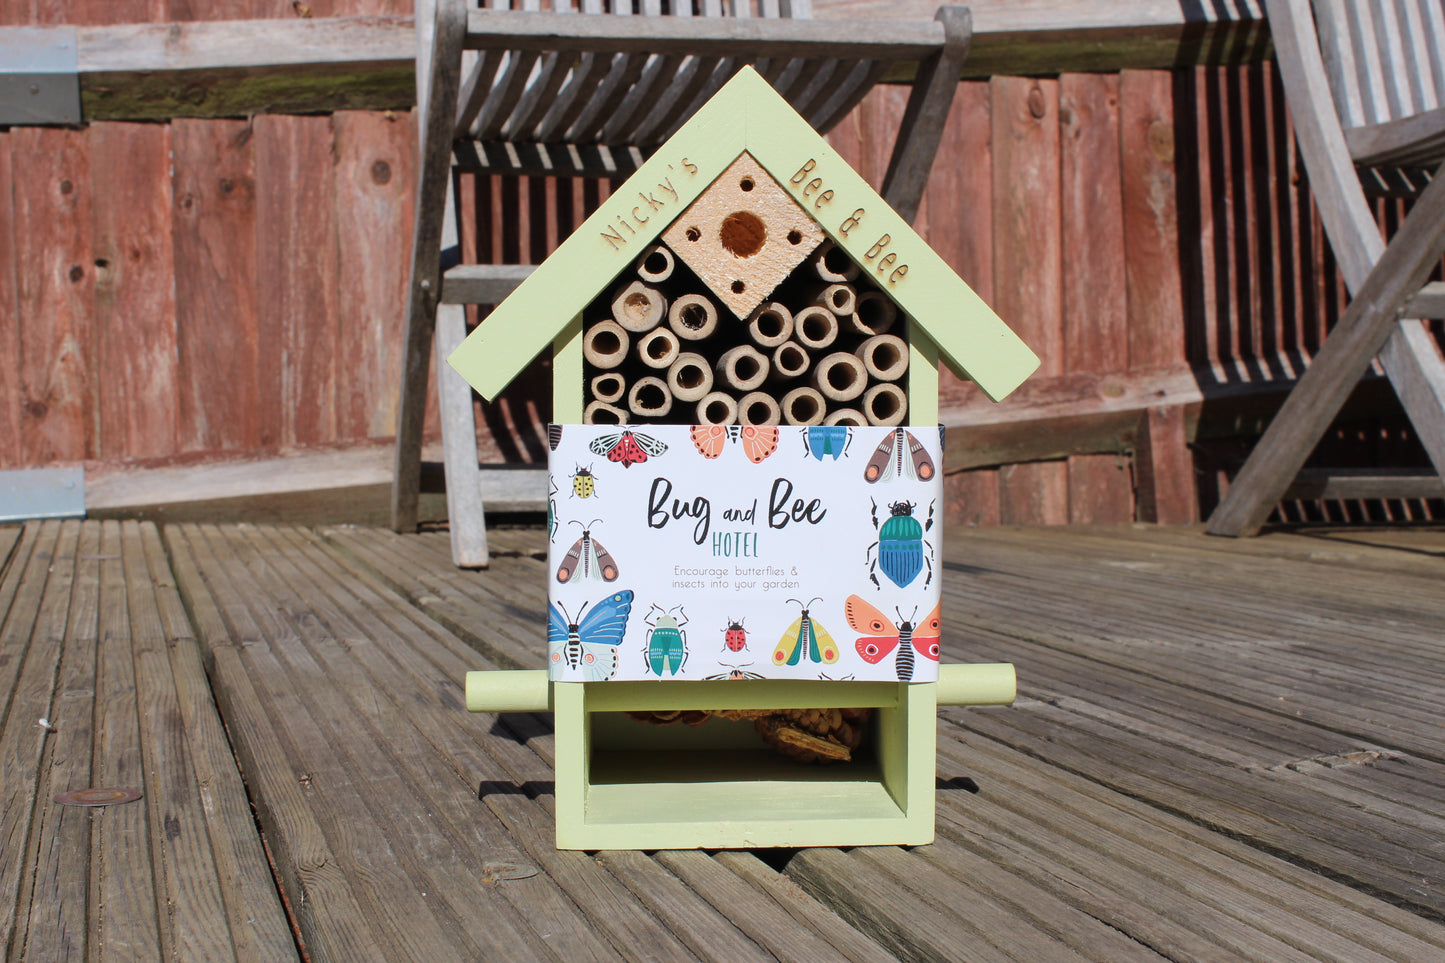 A bug and bee insect home with personalised wordings that says"Nicky's" "Bee & Bee"